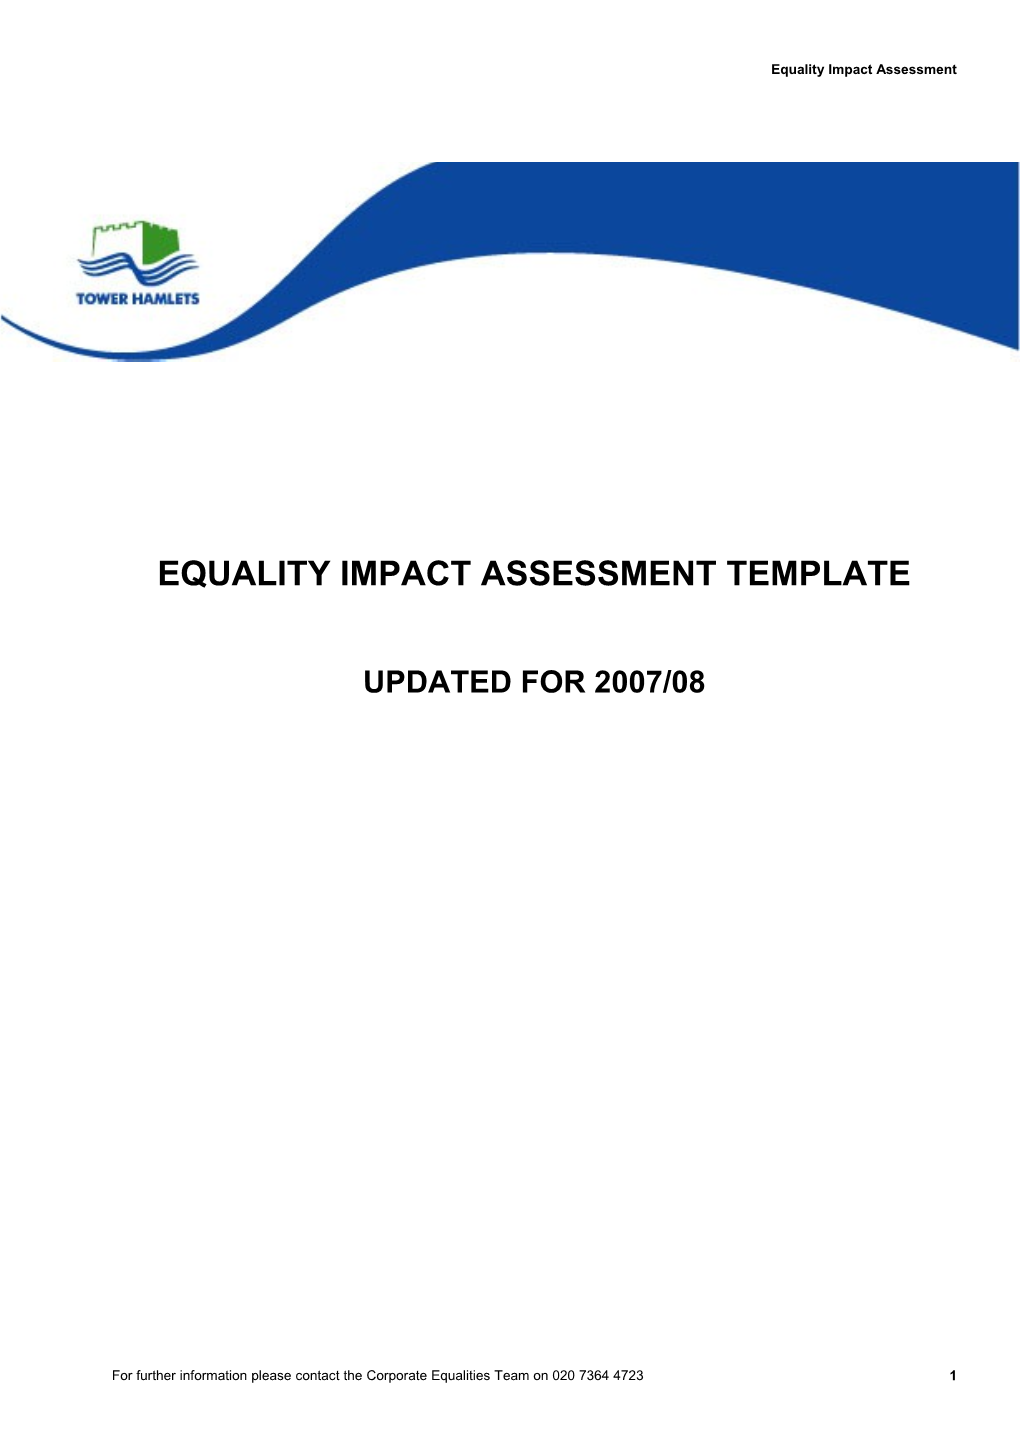 Equality Impact Assessment Template s1